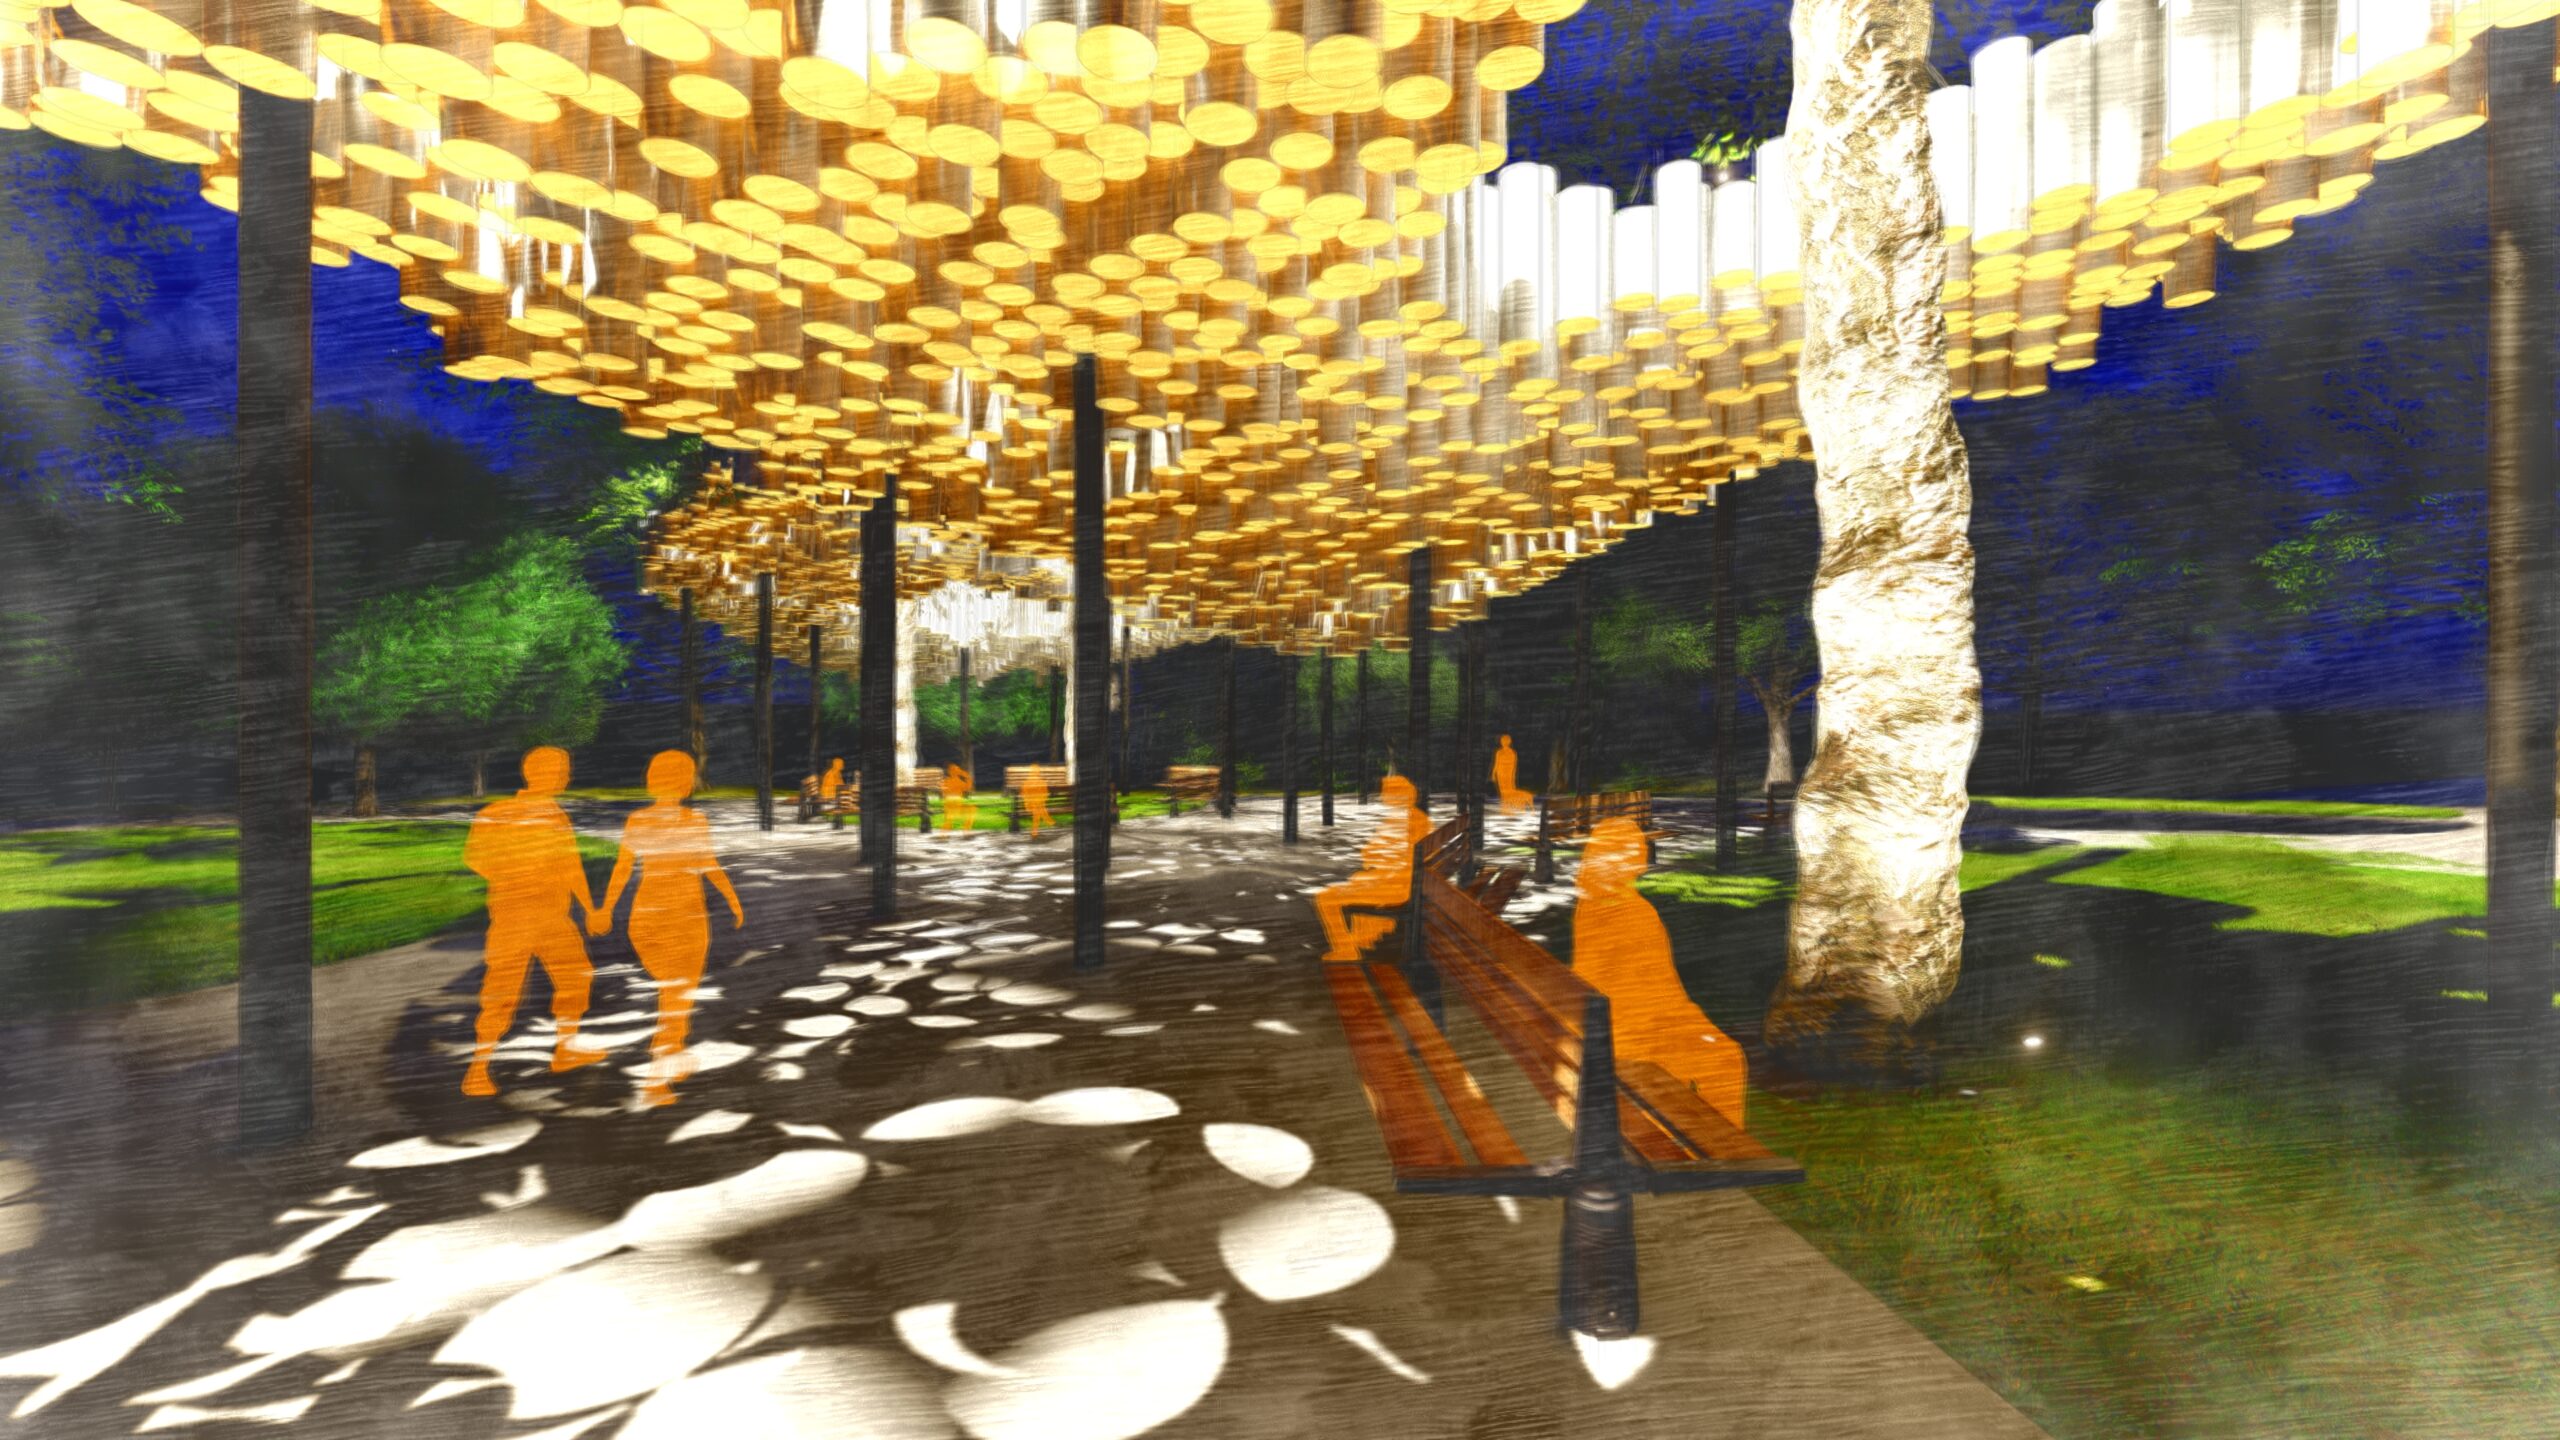 Nighttime rendering of a lit pavilion structure with people underneath.